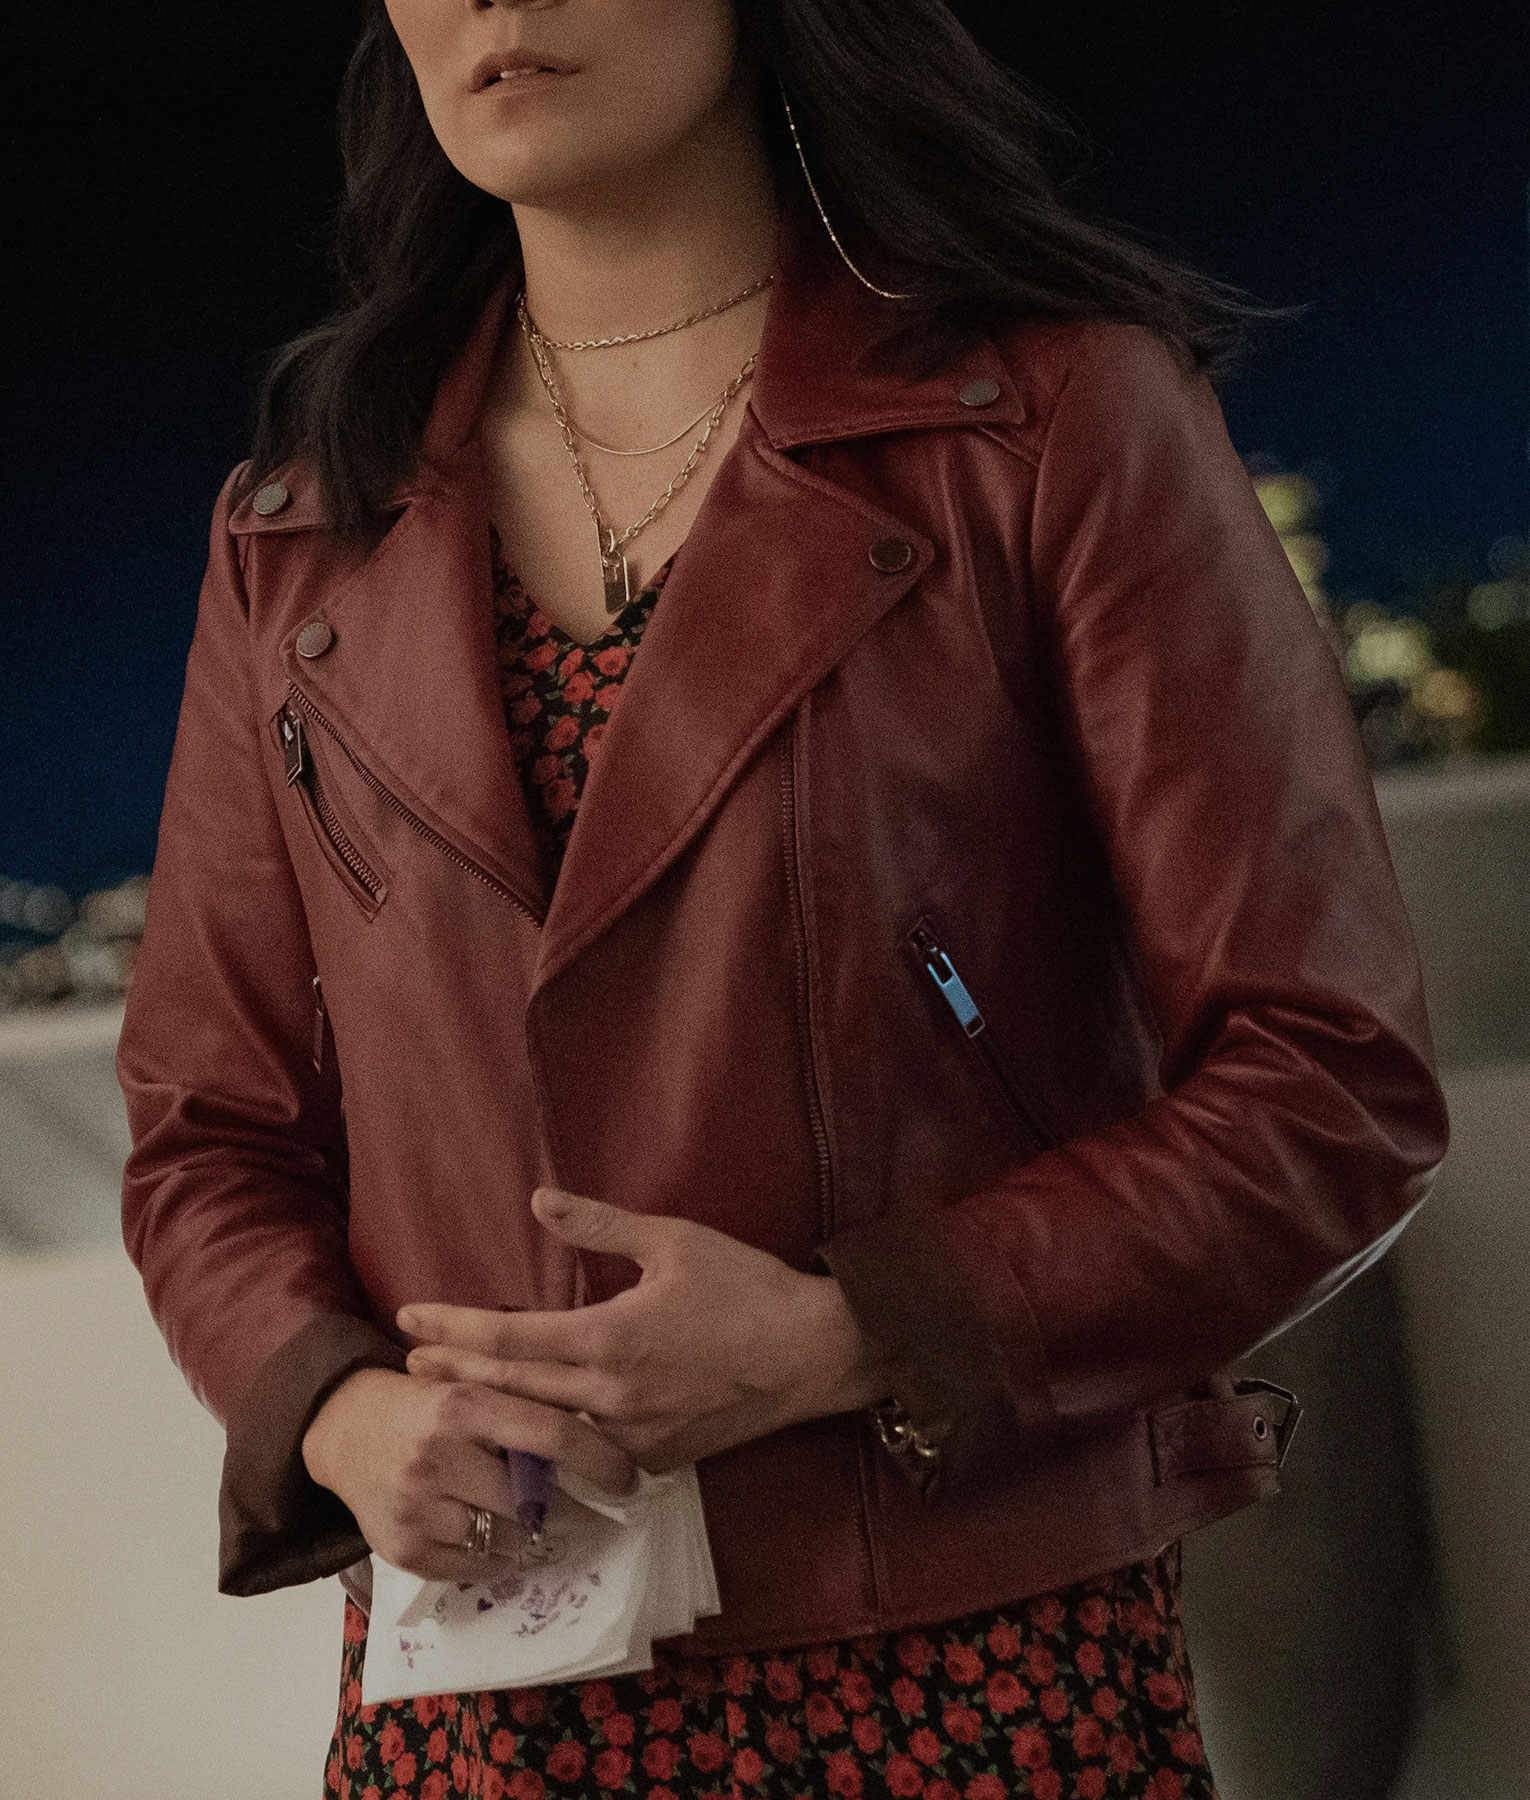 The Afterparty Zoe Chao Maroon Jacket (1)